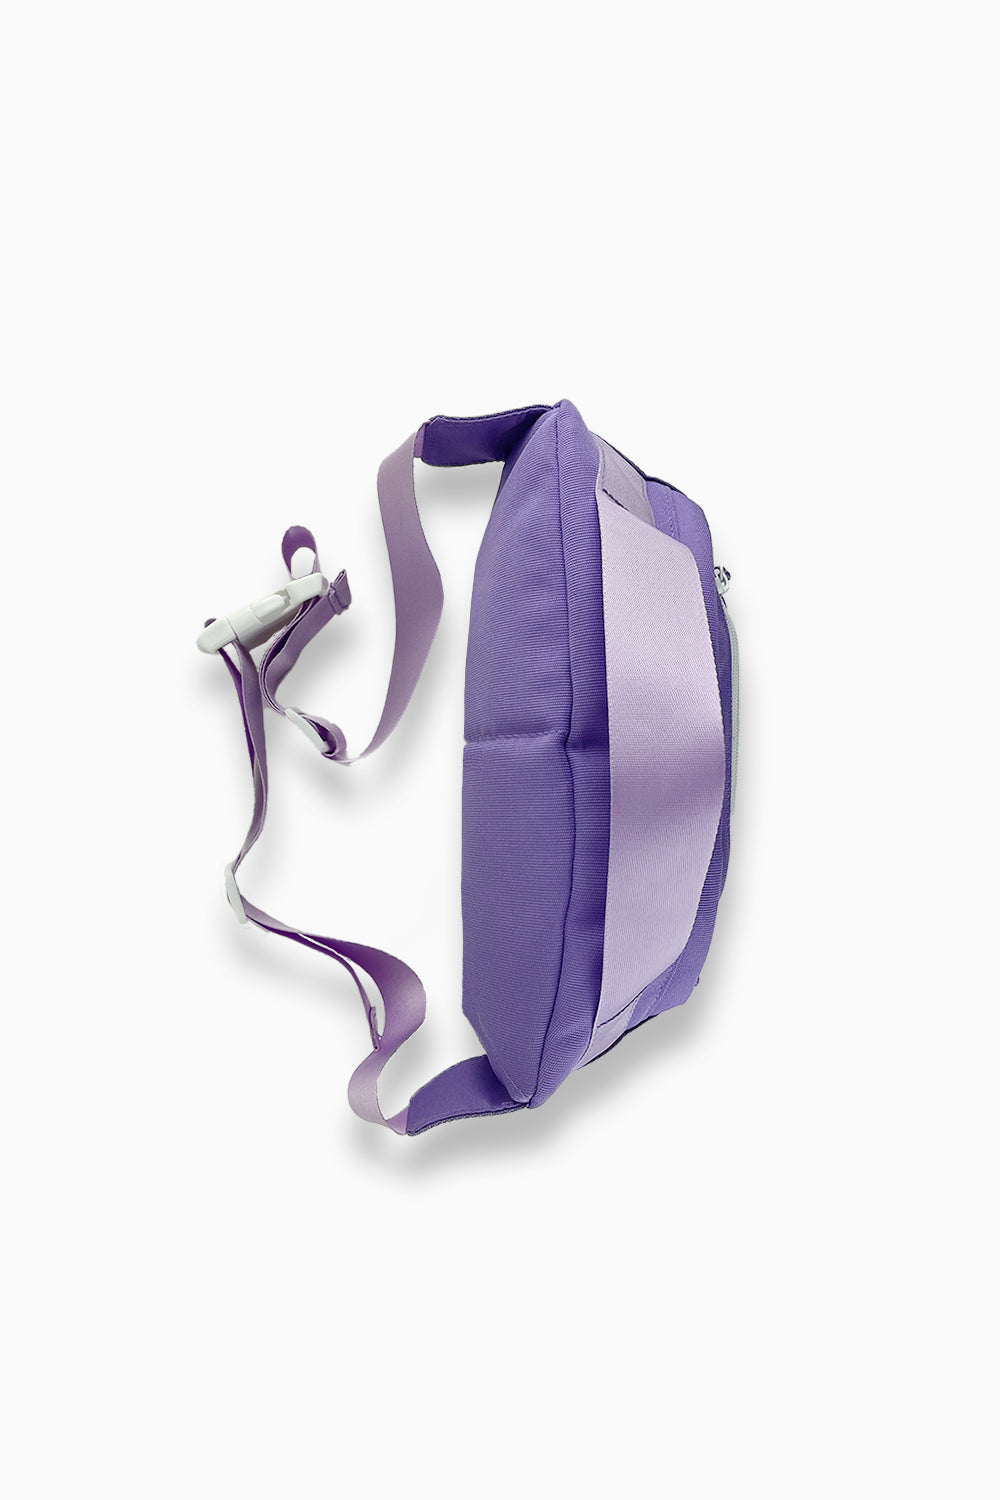 edc purple fanny pack top view 